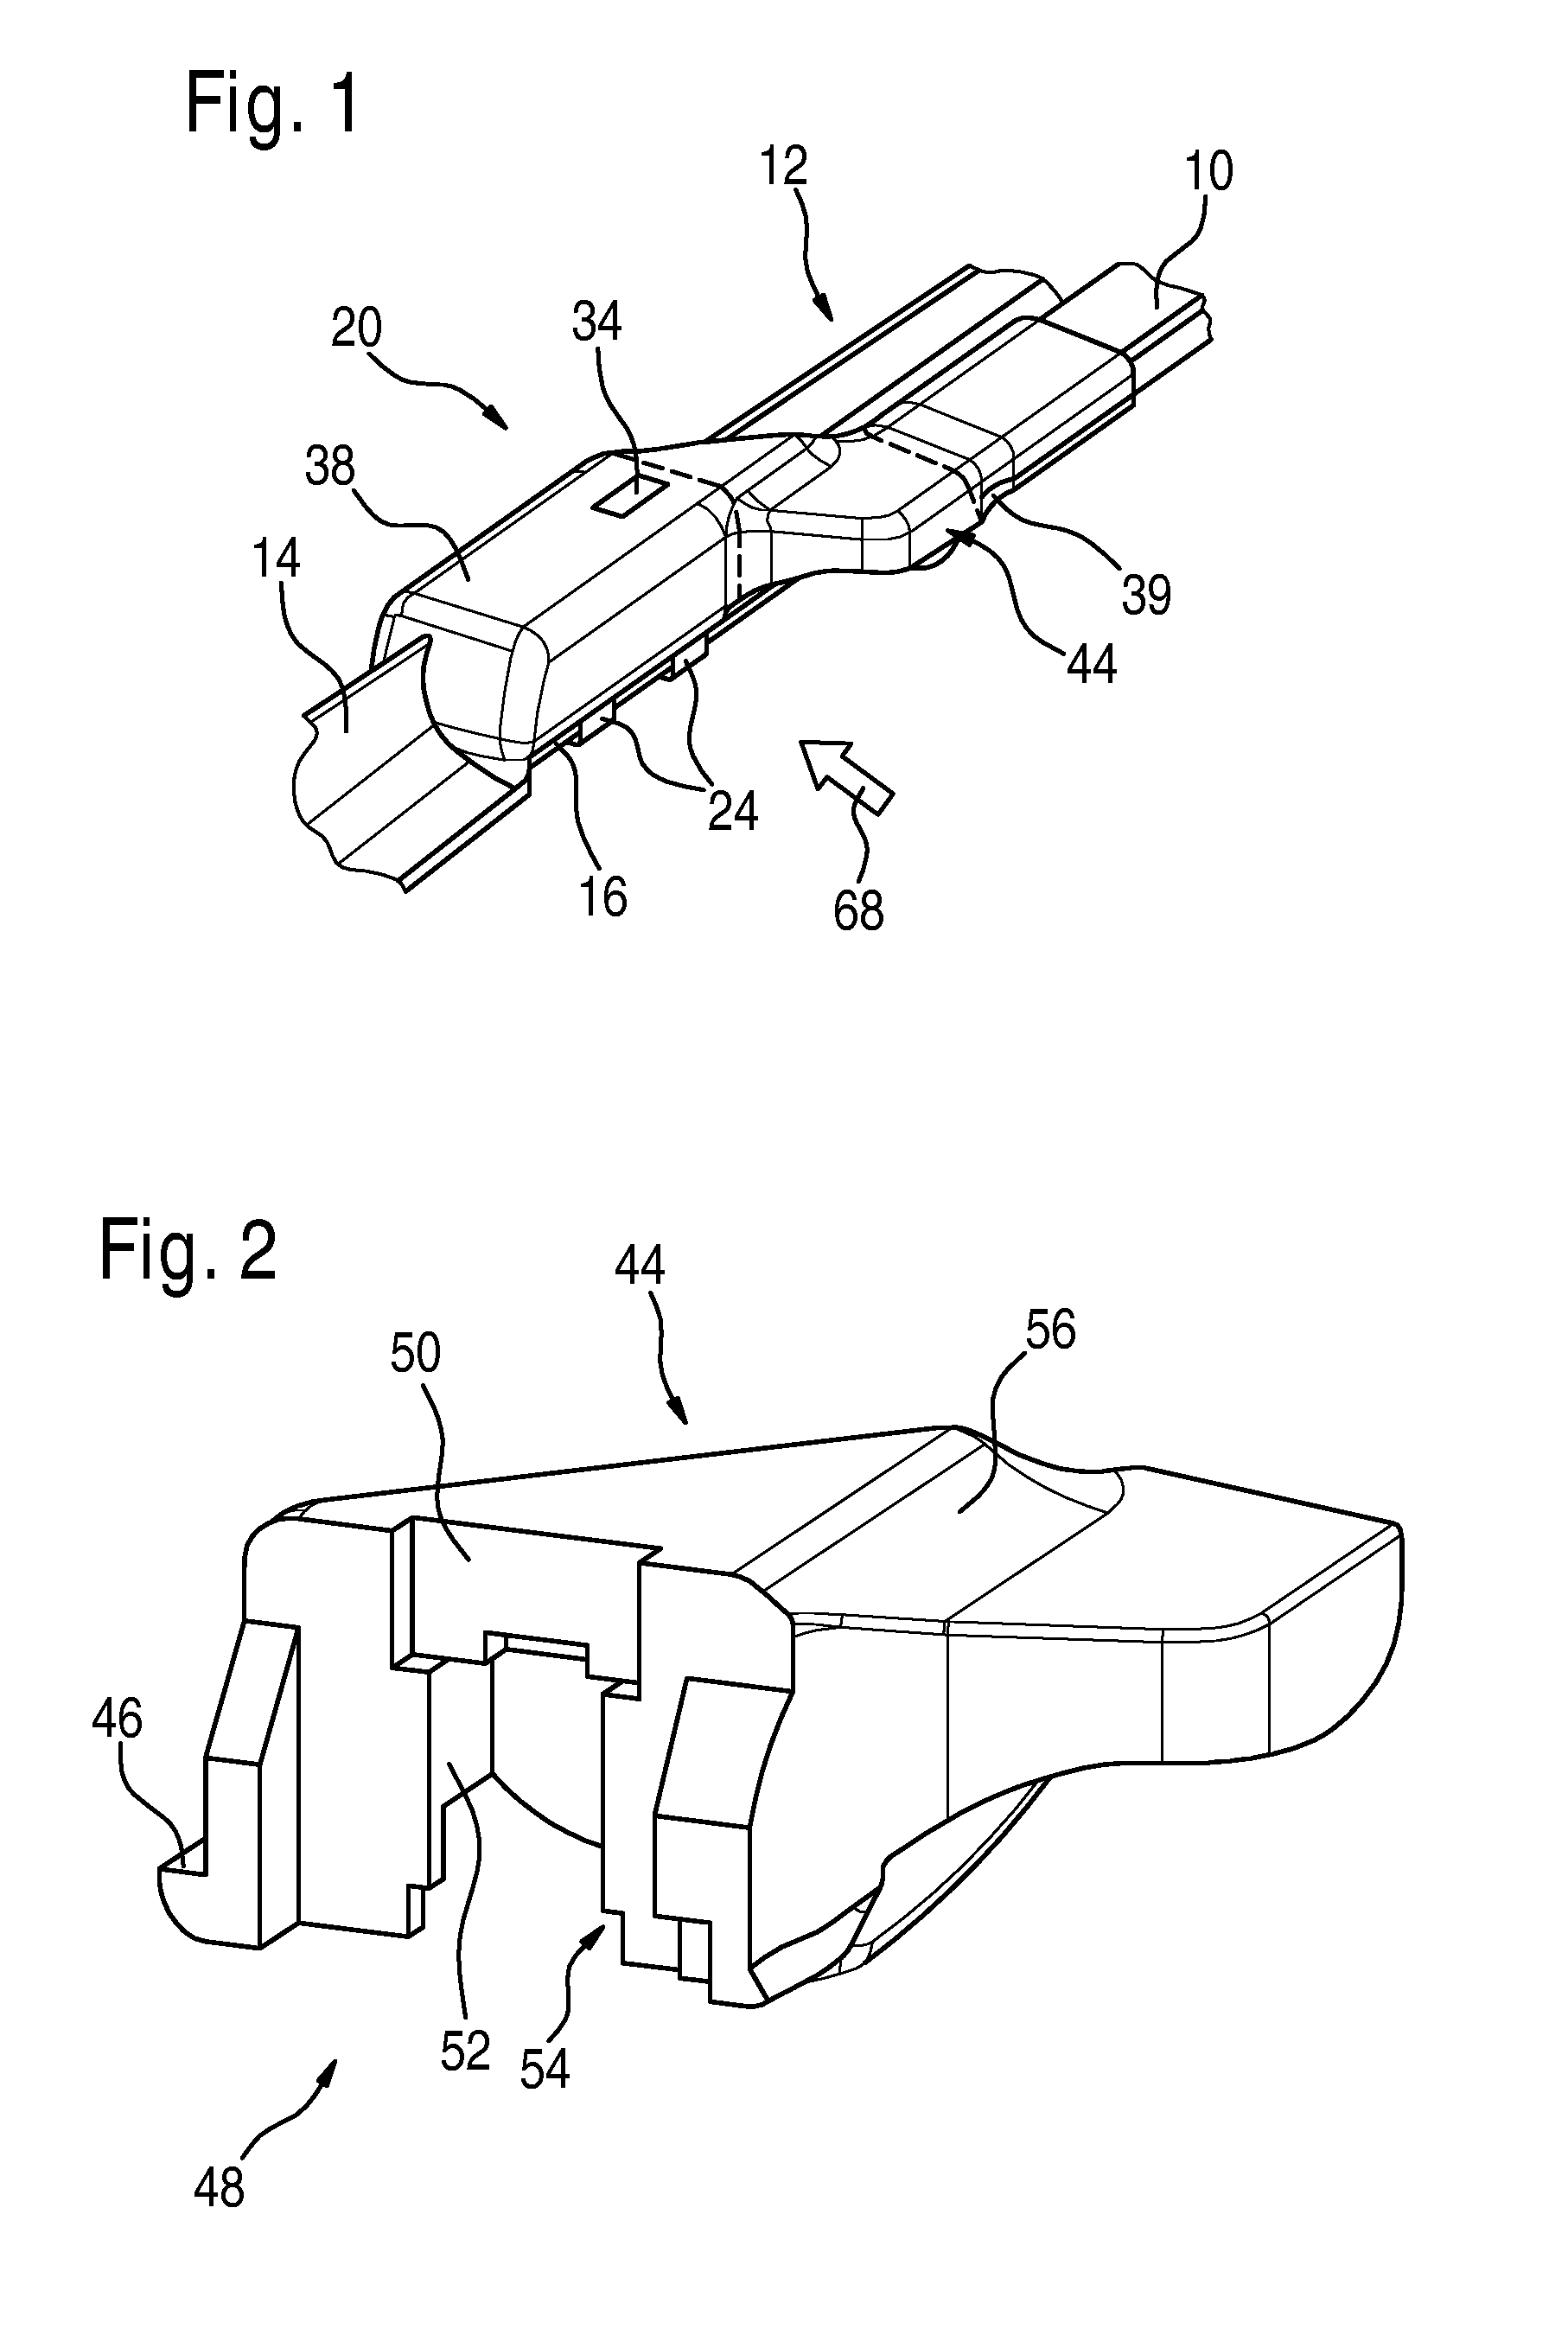 Device for connecting a wiper blade to a wiper arm of a windshield wiper in an articulated manner